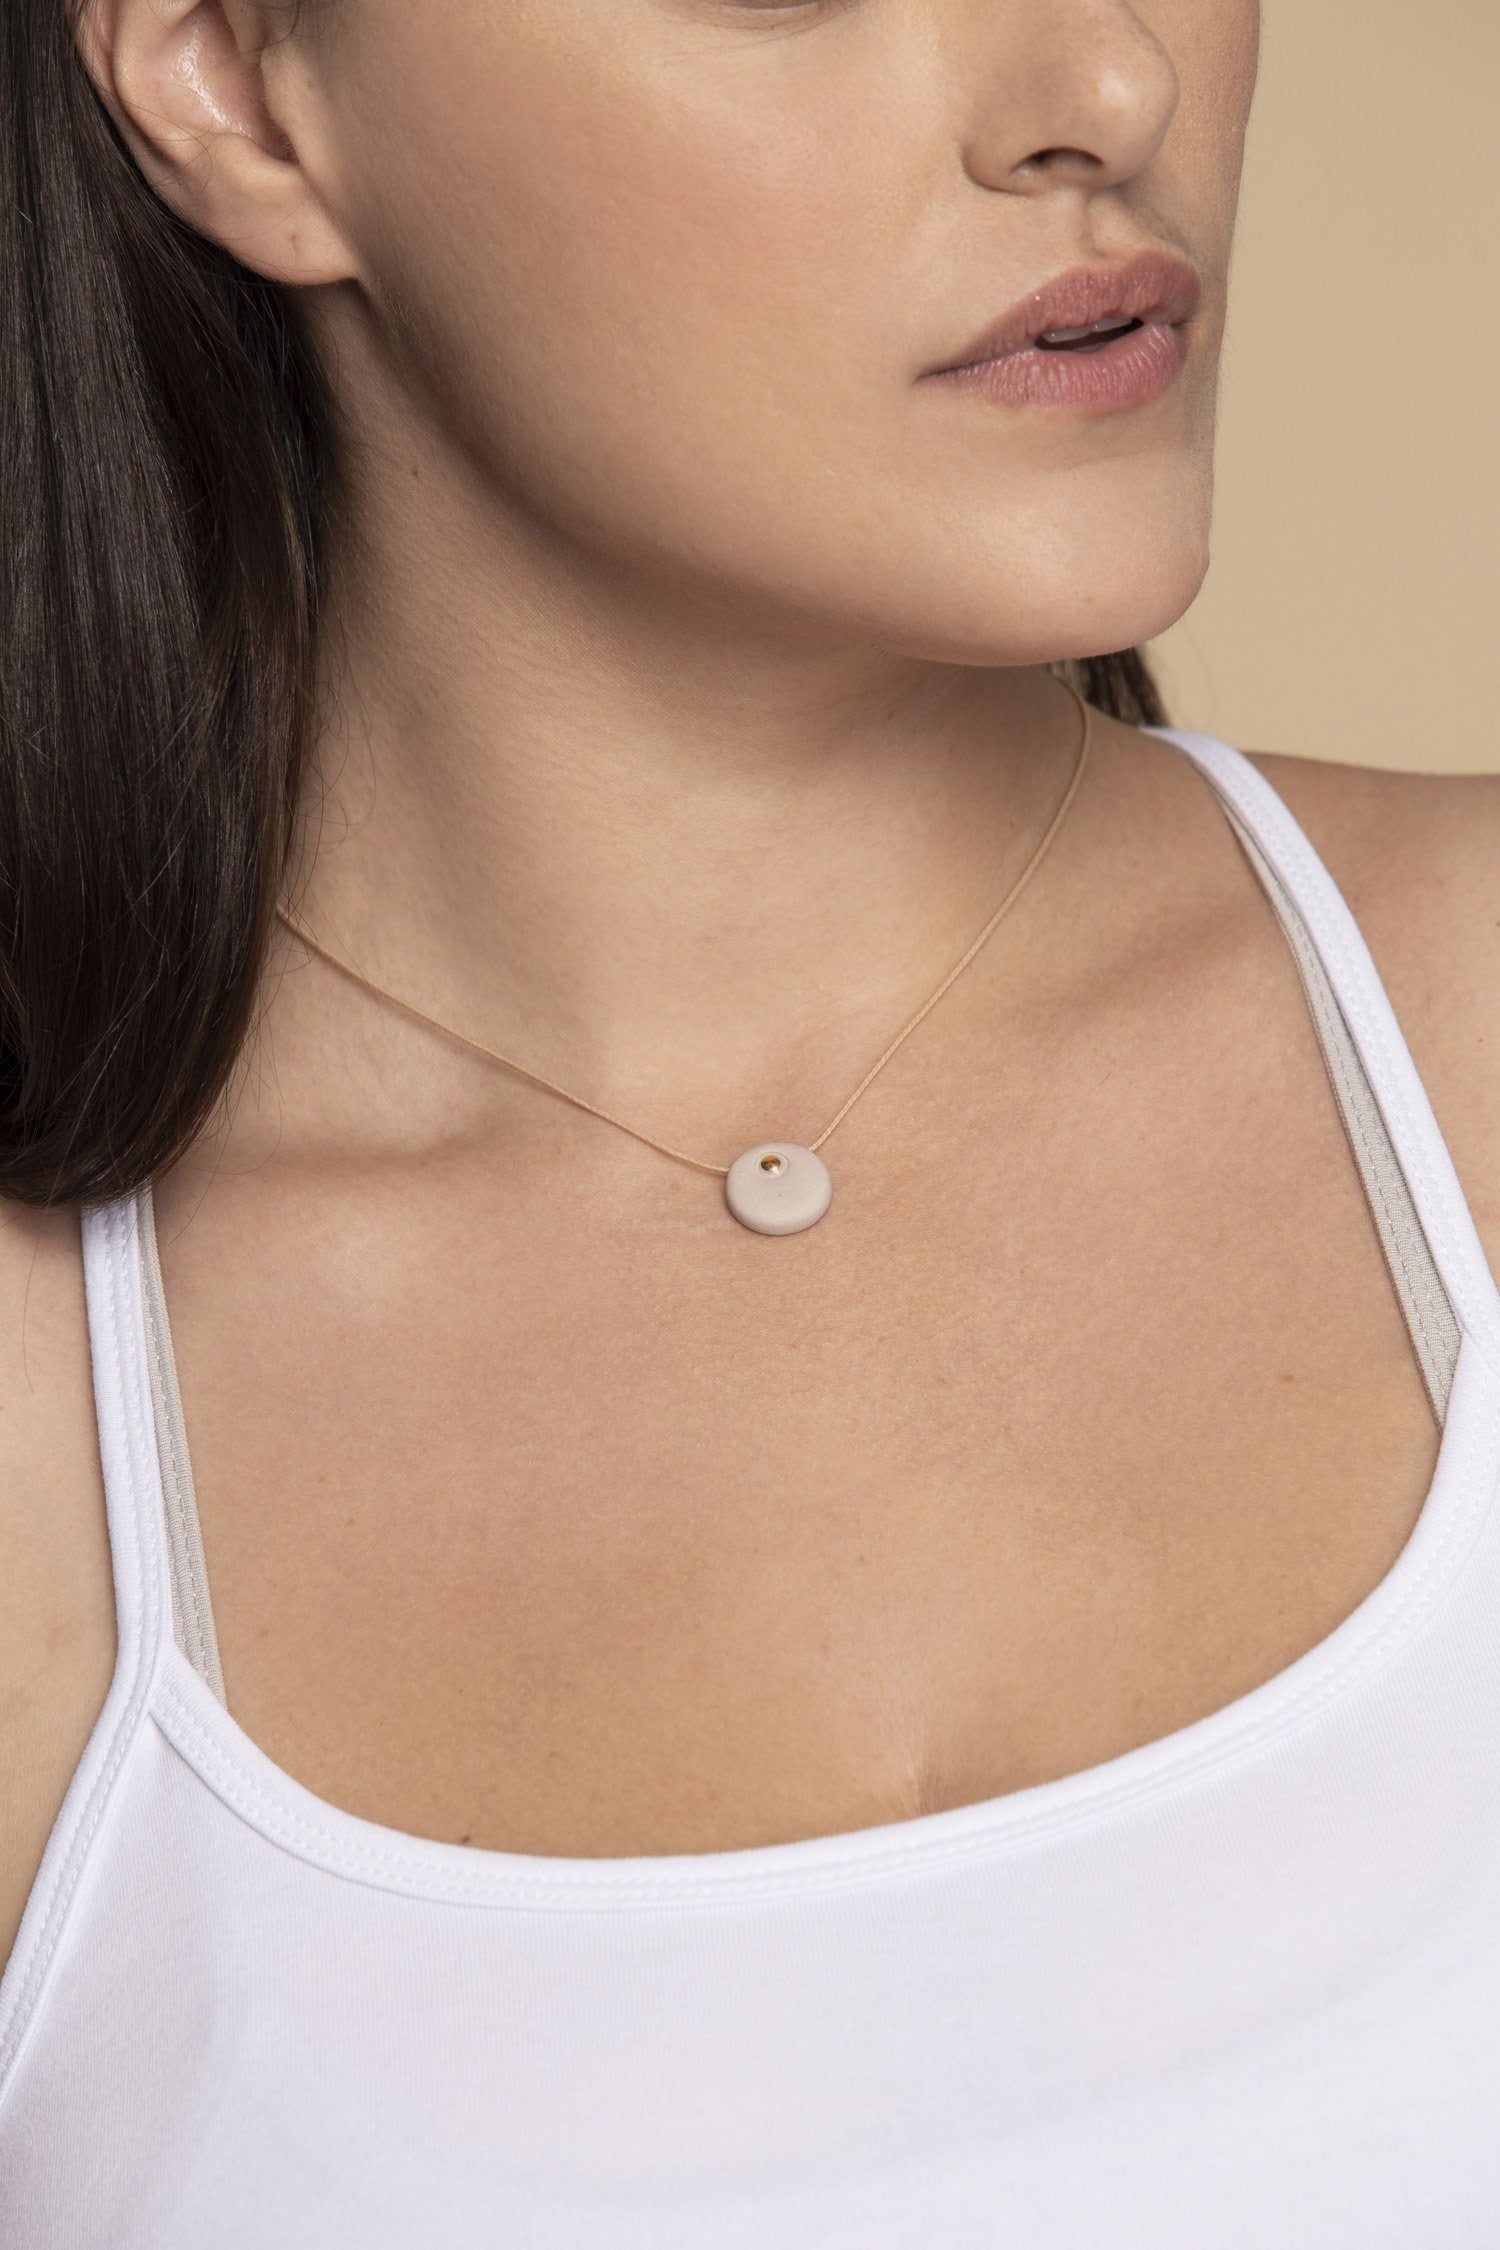 The Ripple Circle Necklace womens clothing Ripple Yoga Wear Nude clay with a 24K gold circle 